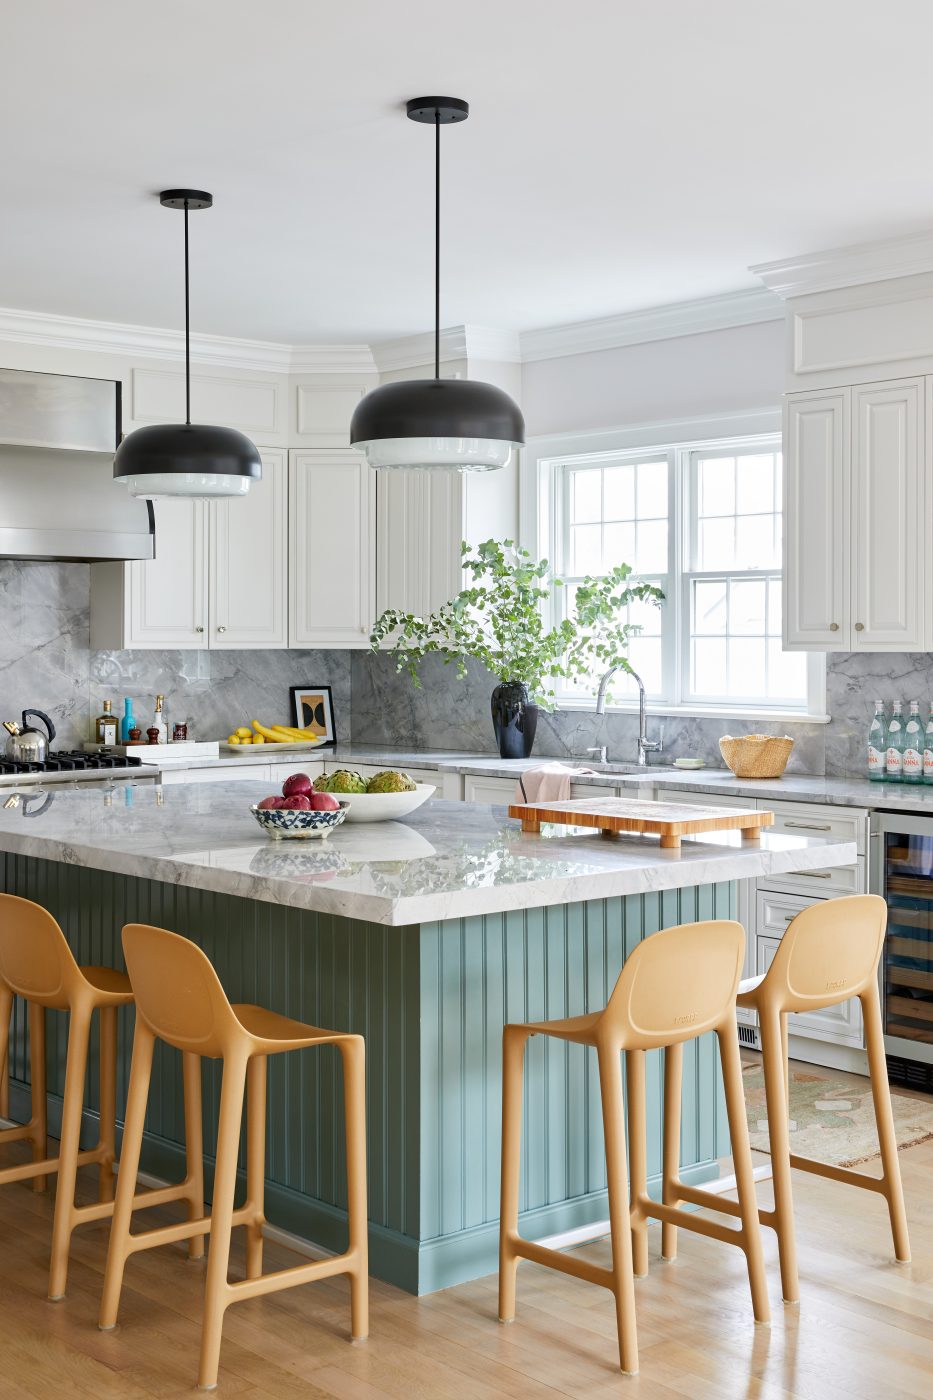 The kitchen of a home designed by Rachel Sloane Interiors in Larchmont, New York